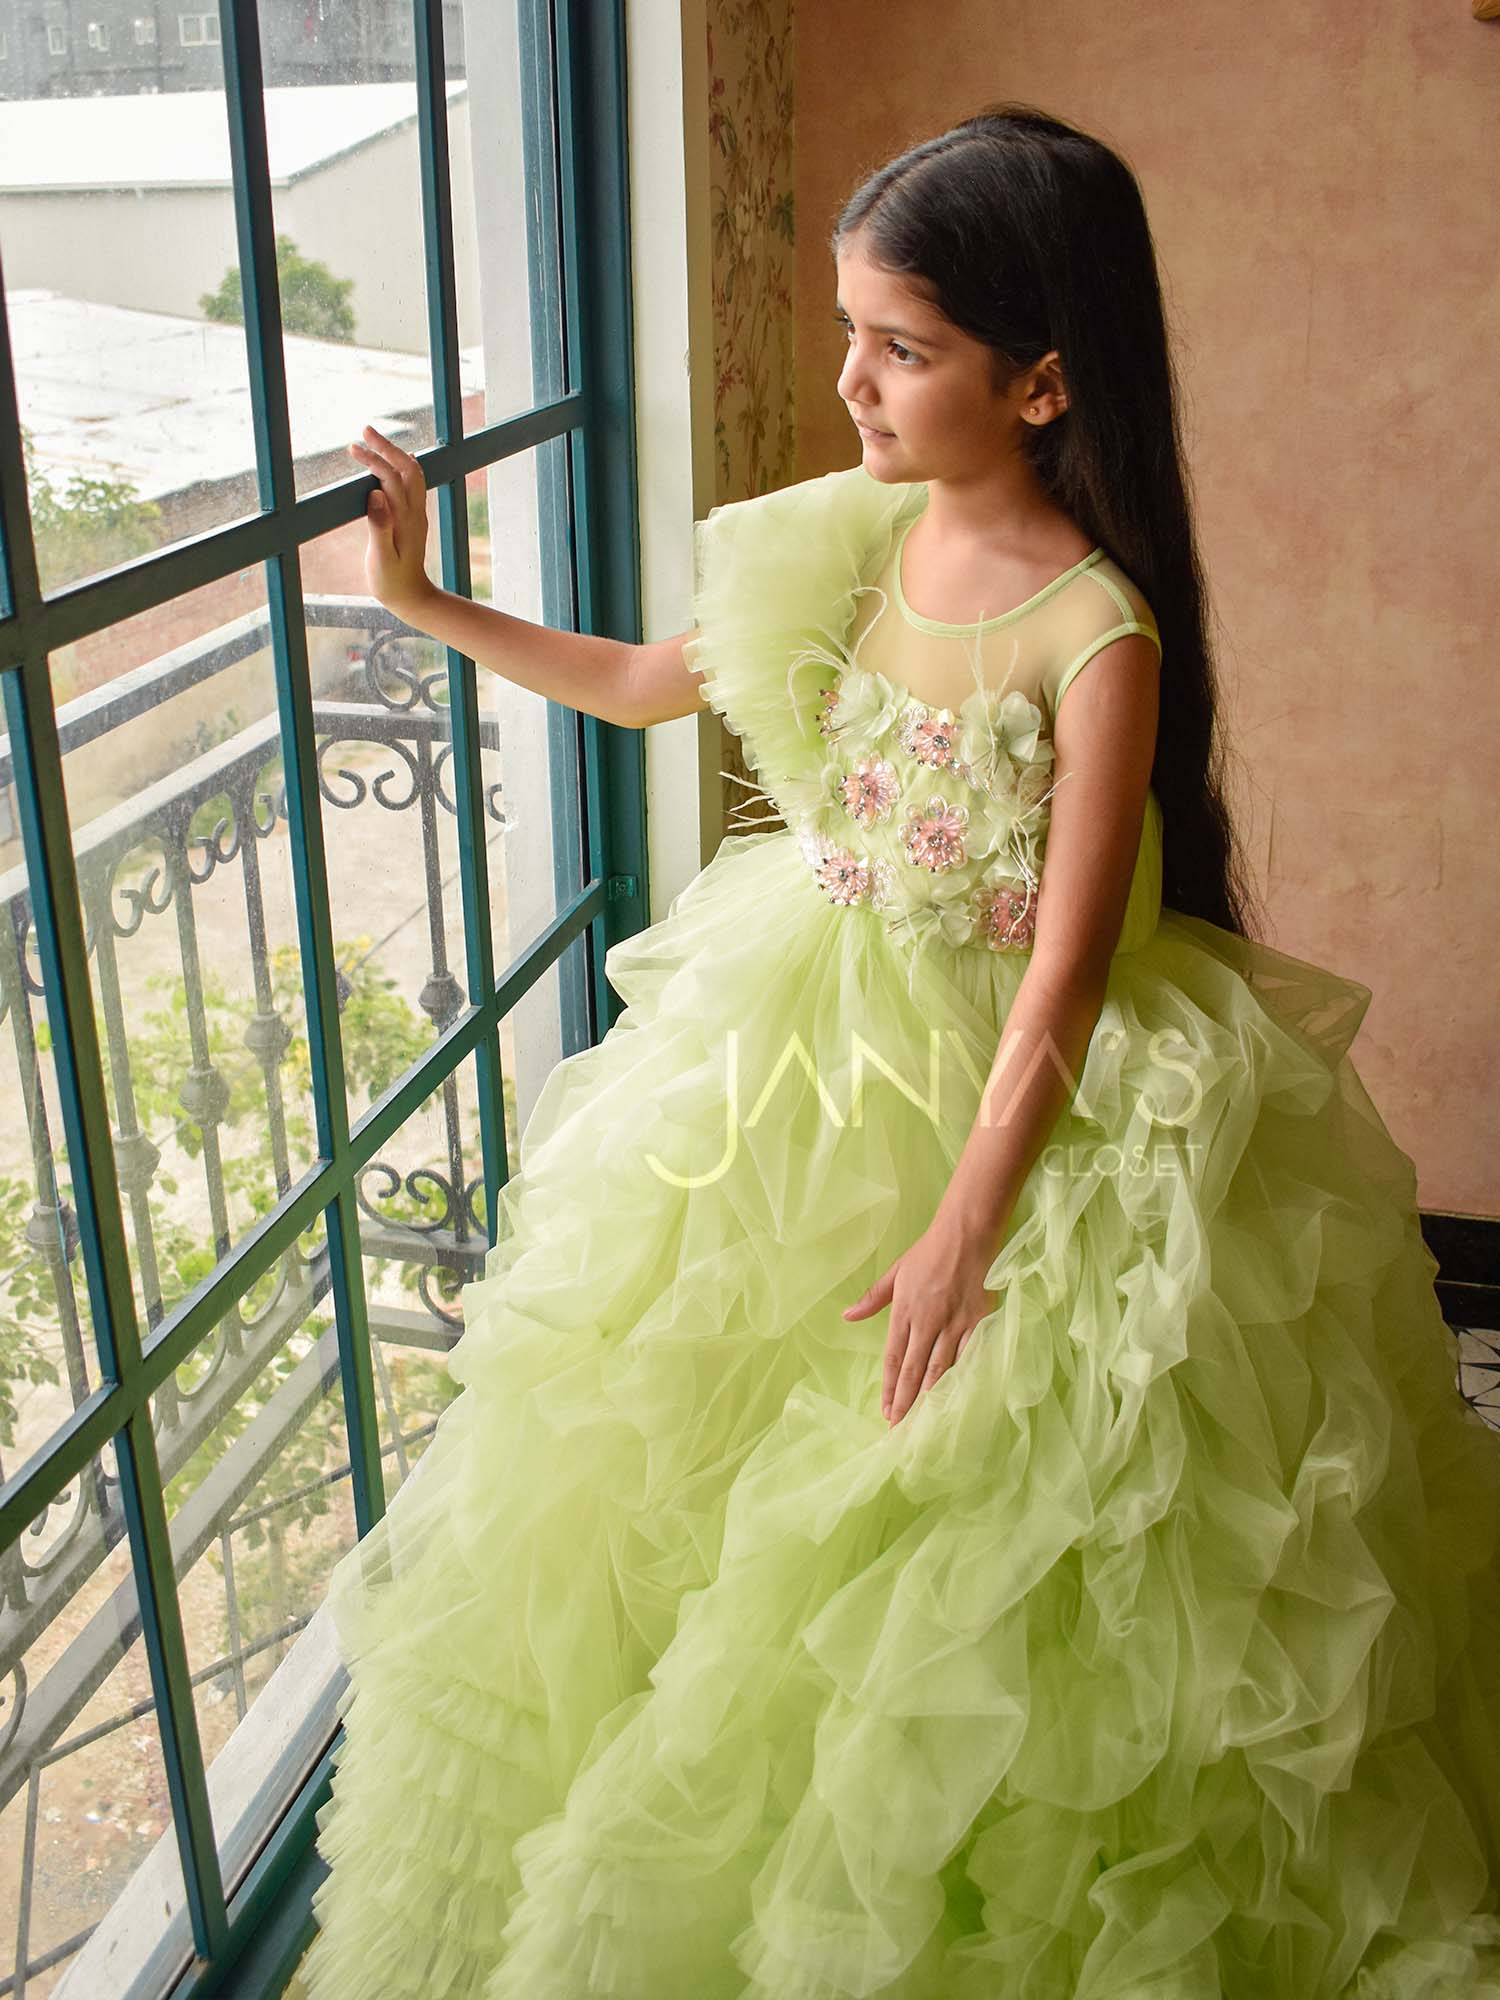 Green Ruffled Drape Princess Gown With Hair Accessory